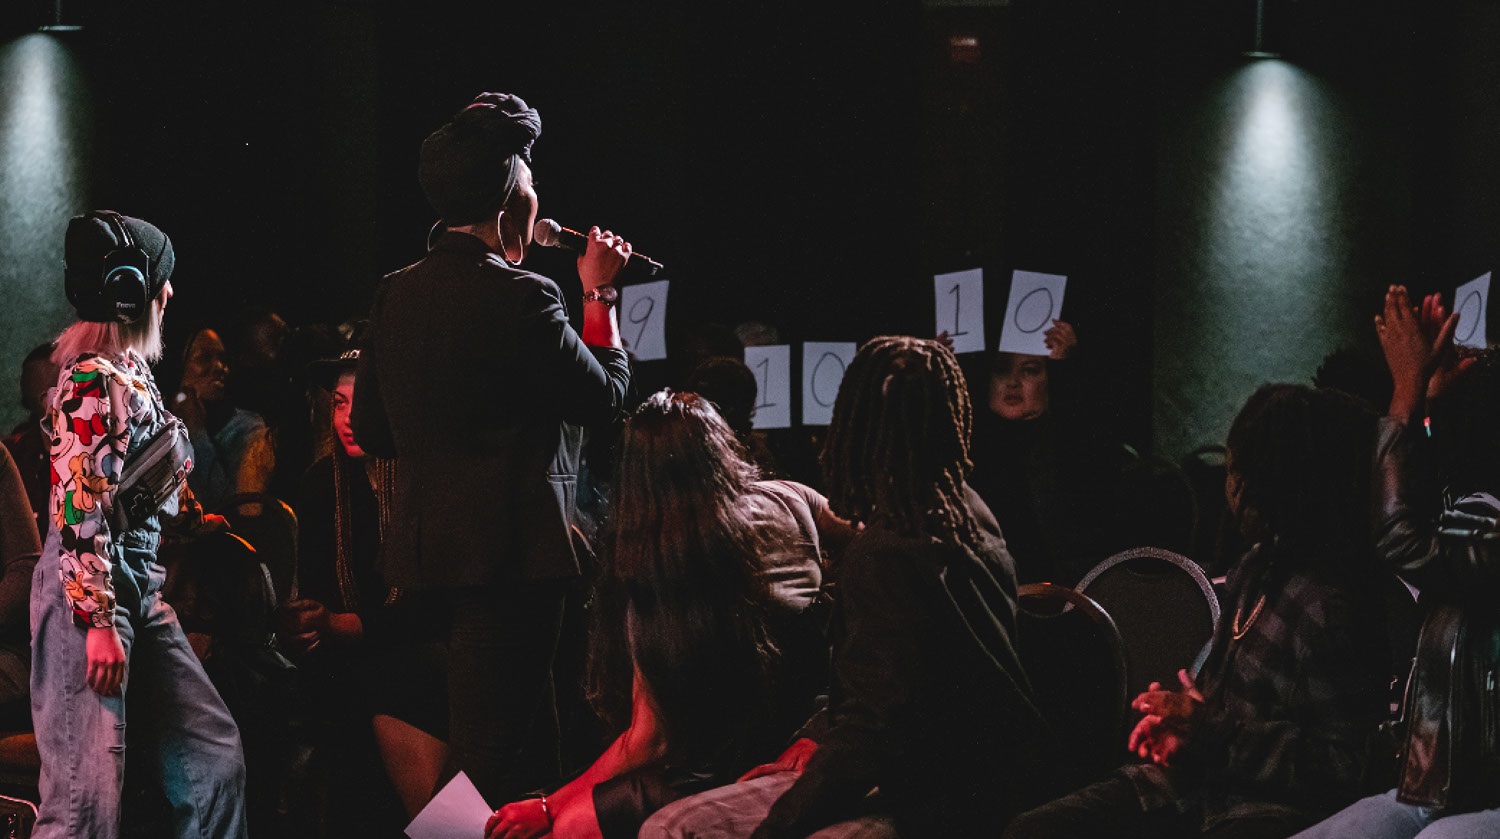 Image of a dimly lit room full of people. Two people can be seen from behind standing. One of the women that is standing speaks into a microphone. She is dressed in all black clothing with a black headwrap and large hoop earrings. The people seated around her turn to face the back of the room. The seated individuals at the back of the room hold white pieces of paper above them. The papers display an array of black numbers written on them. 